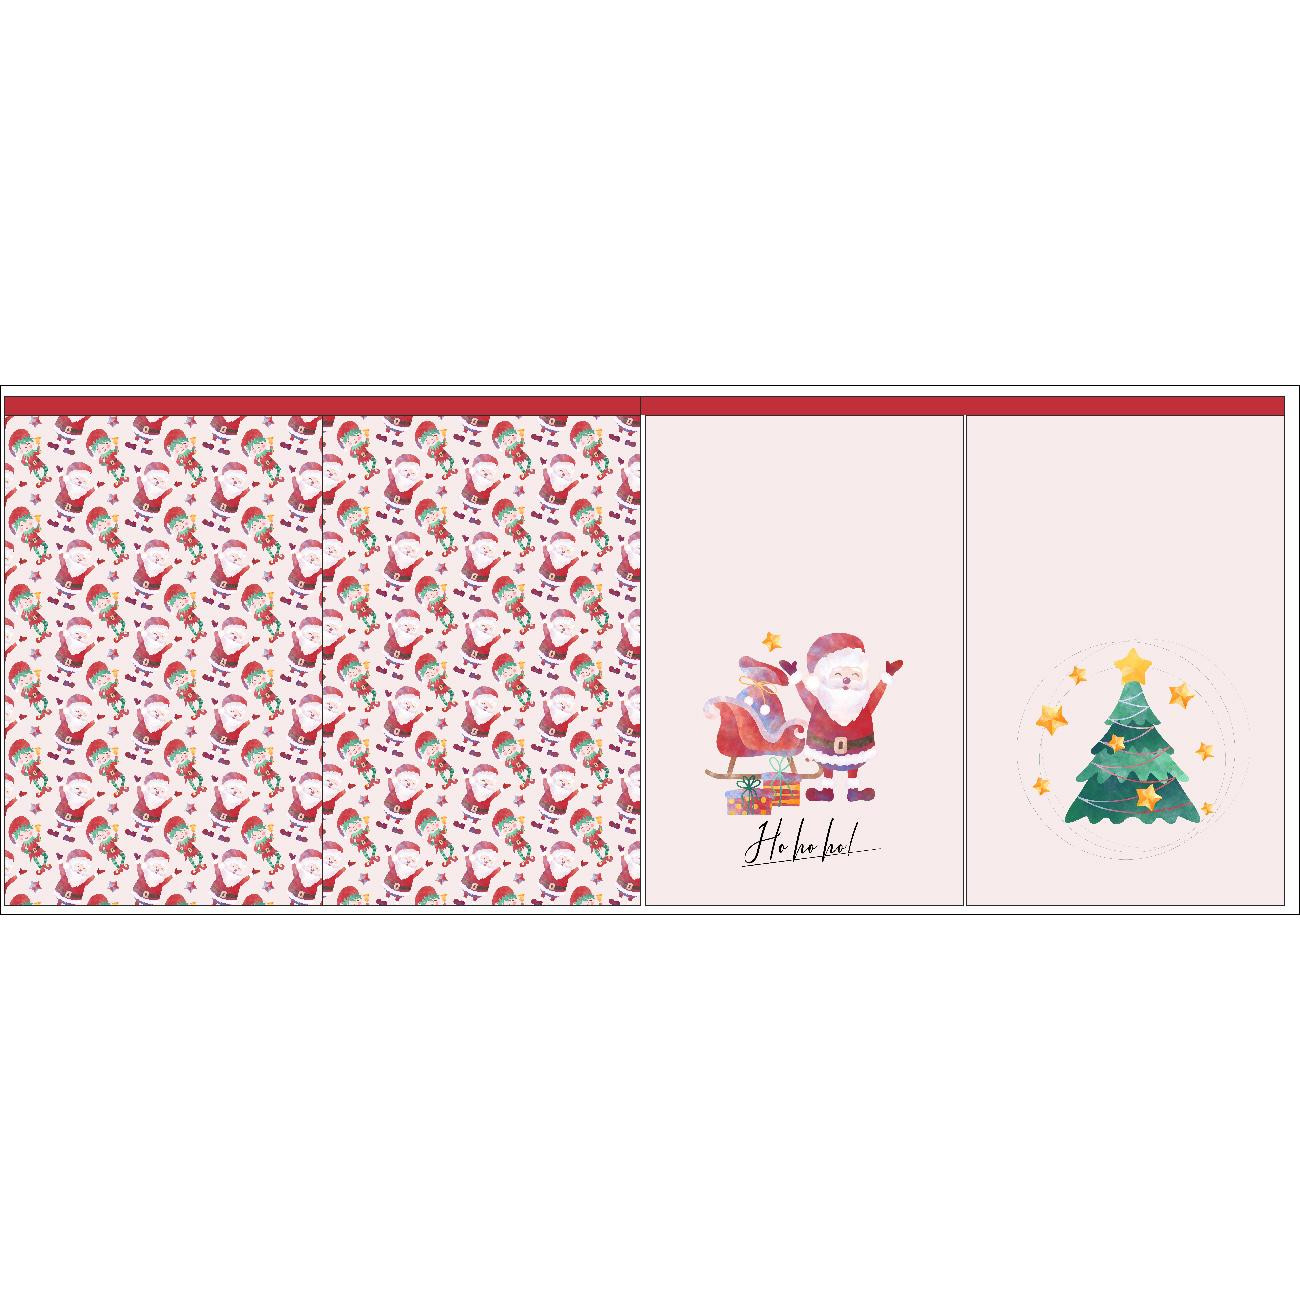 Gift pouches - SANTA AND ELF (CHRISTMAS FRIENDS) - sewing set